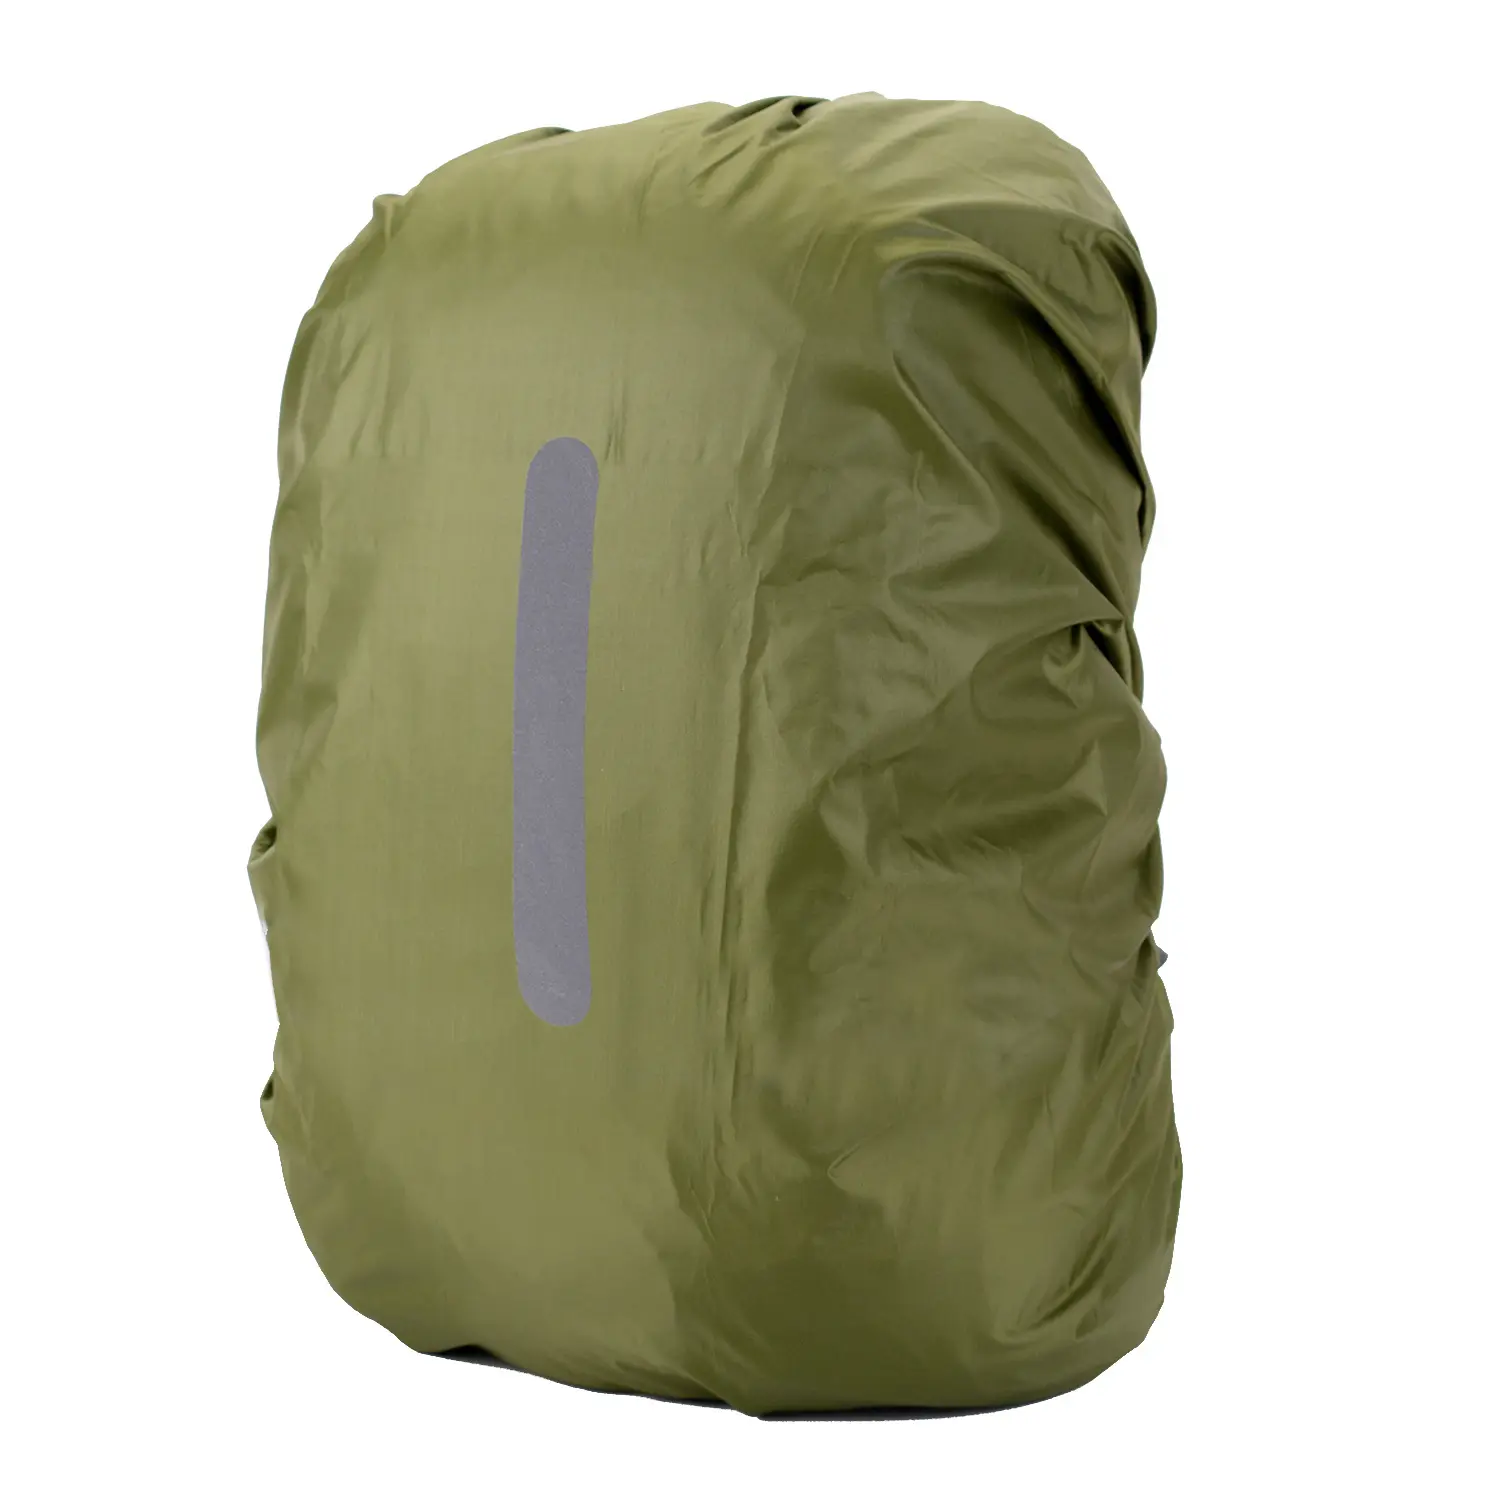 Factory wholesale supports Amazon warehouse backpack bag rain cover waterproof Reflective strip design 30 40L